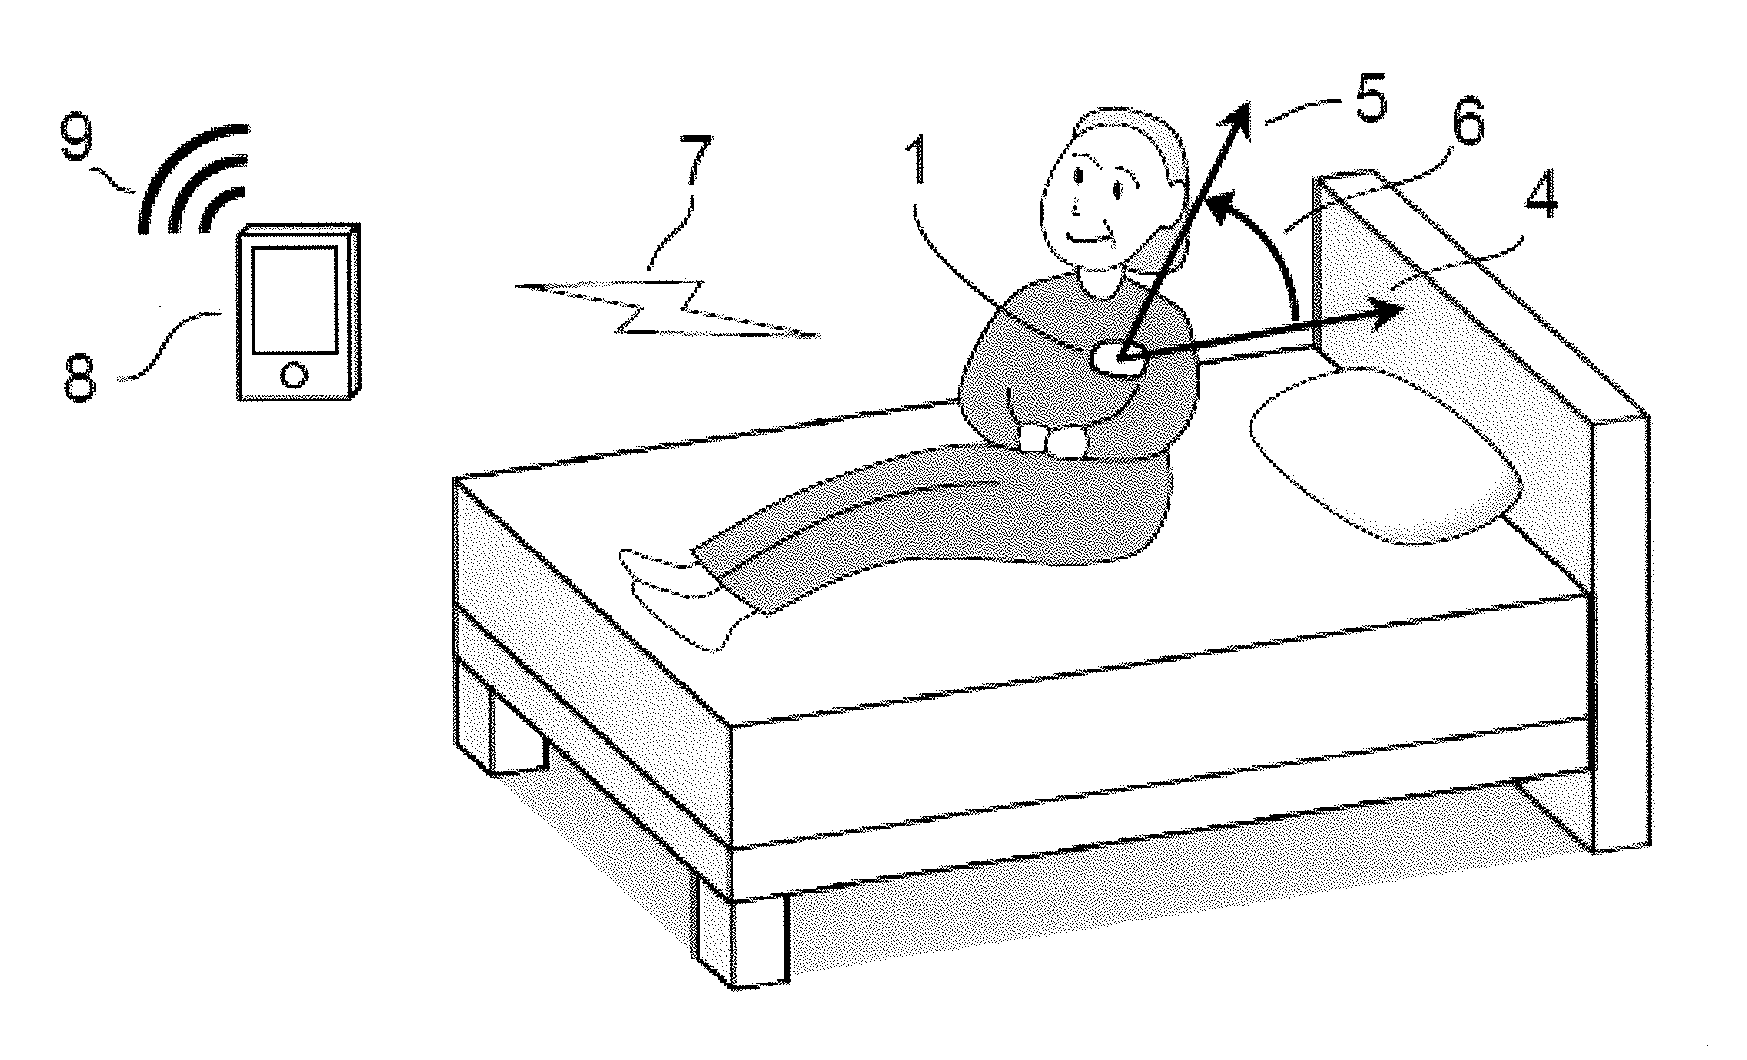 Detection of changes from a seated or lying body position by sensing body angle